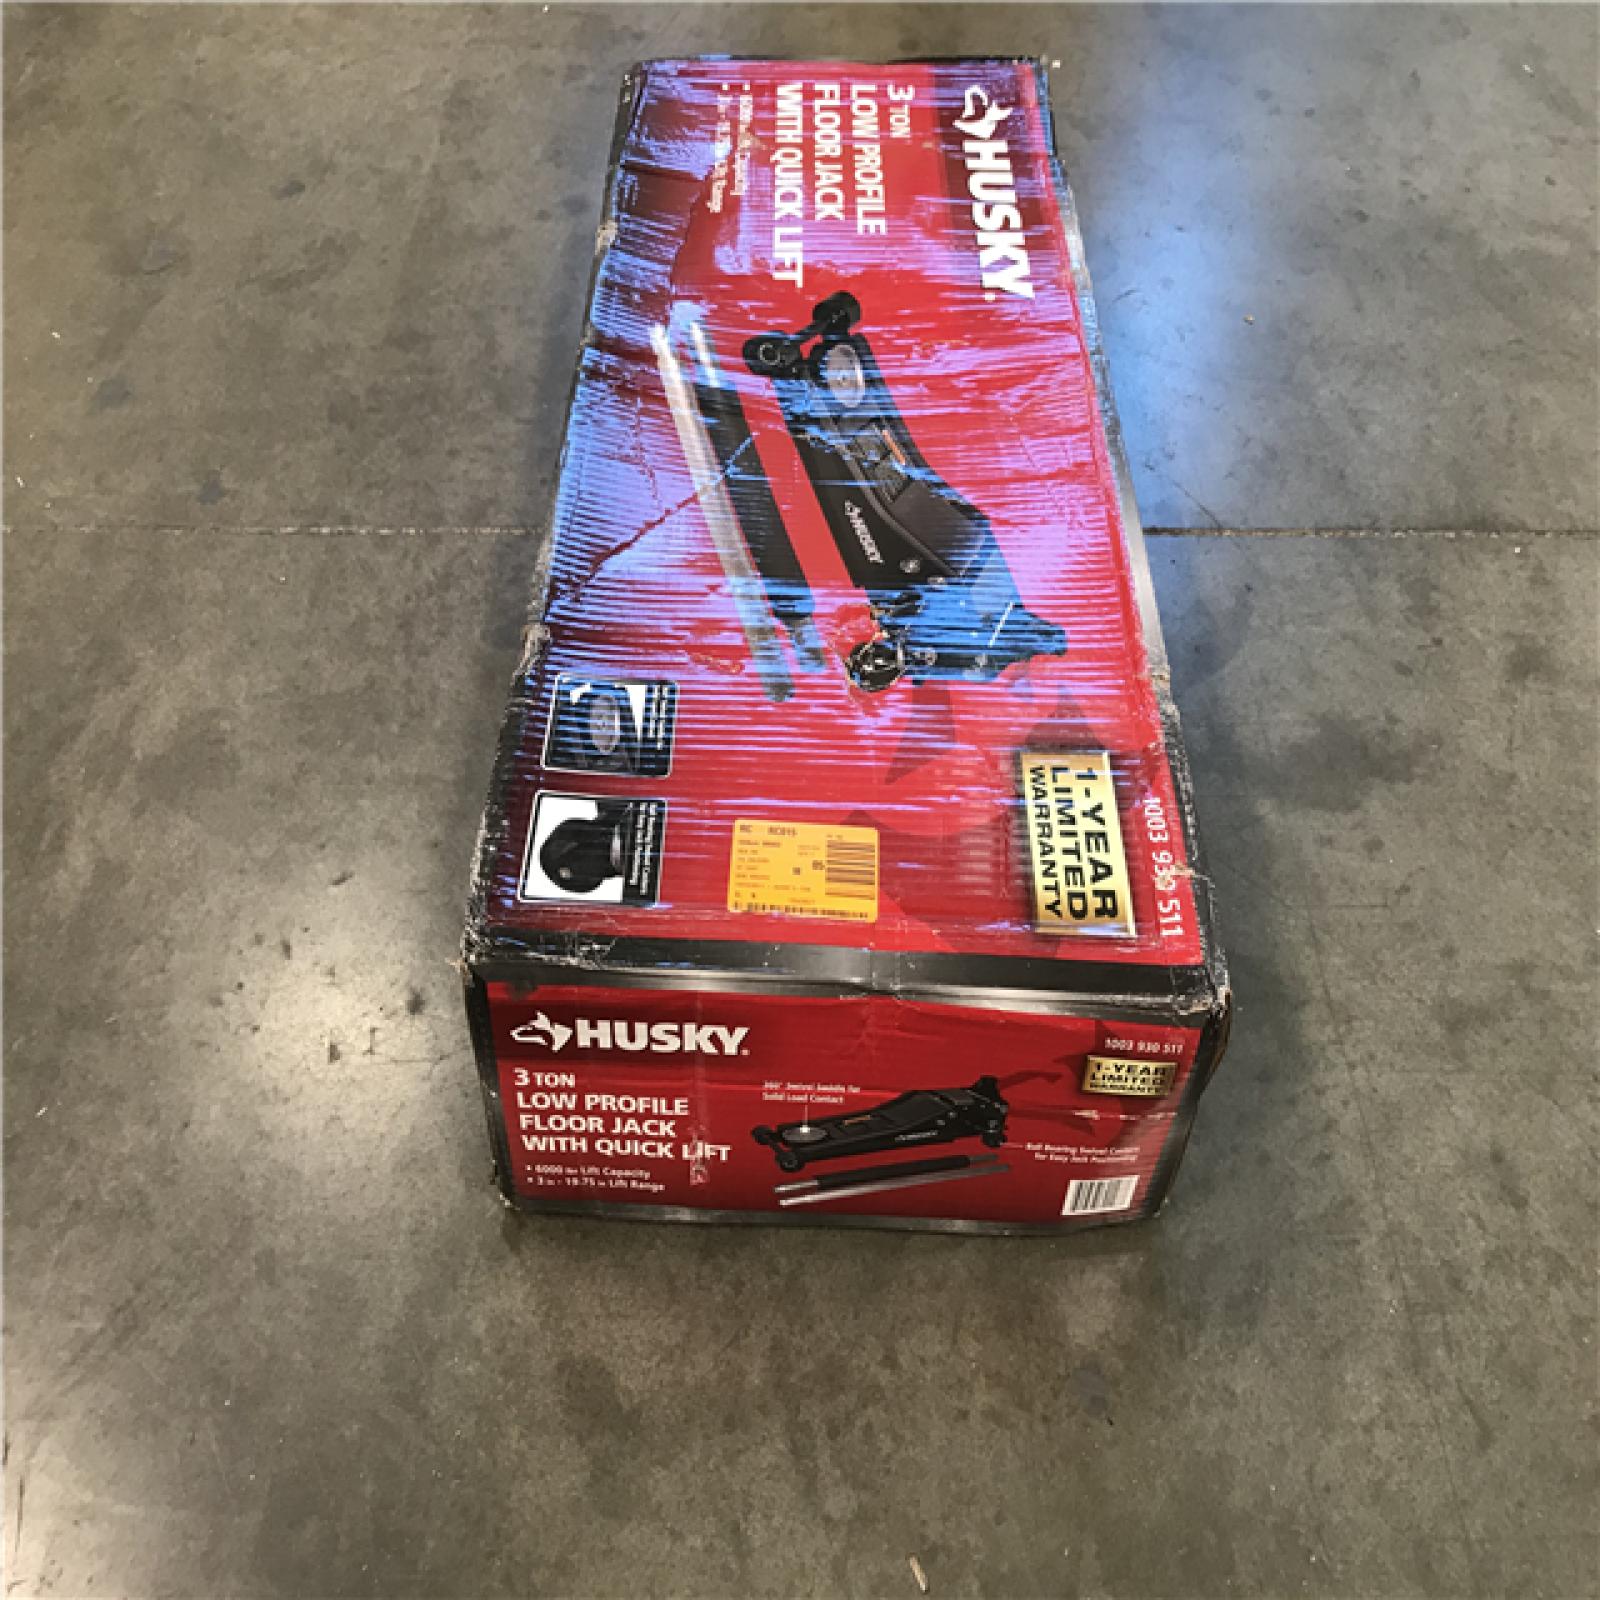 California NEW 3-Ton Low Profile Car Jack With Quick Lift